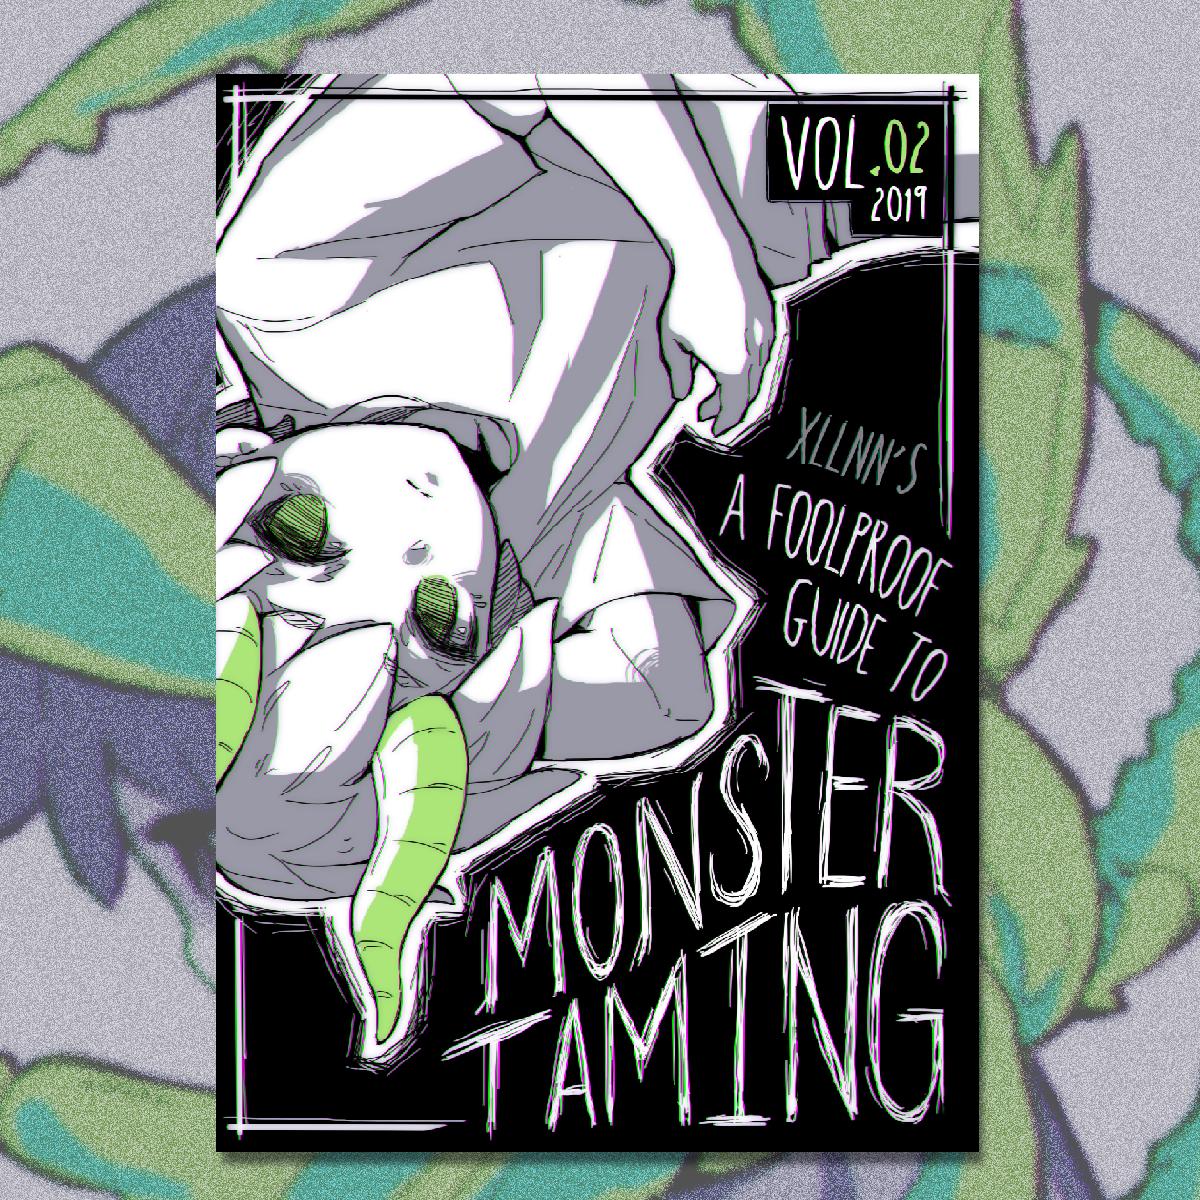 A Foolproof Guide to Monster Taming (ZINE) Vol 1 & 2 is part of this bundle! Proceeds go to PCRF Palestine Children's Relief Fund. 

For a donation of $8 you get a bundle of 300+ indie games, comics, zines, assets and more!